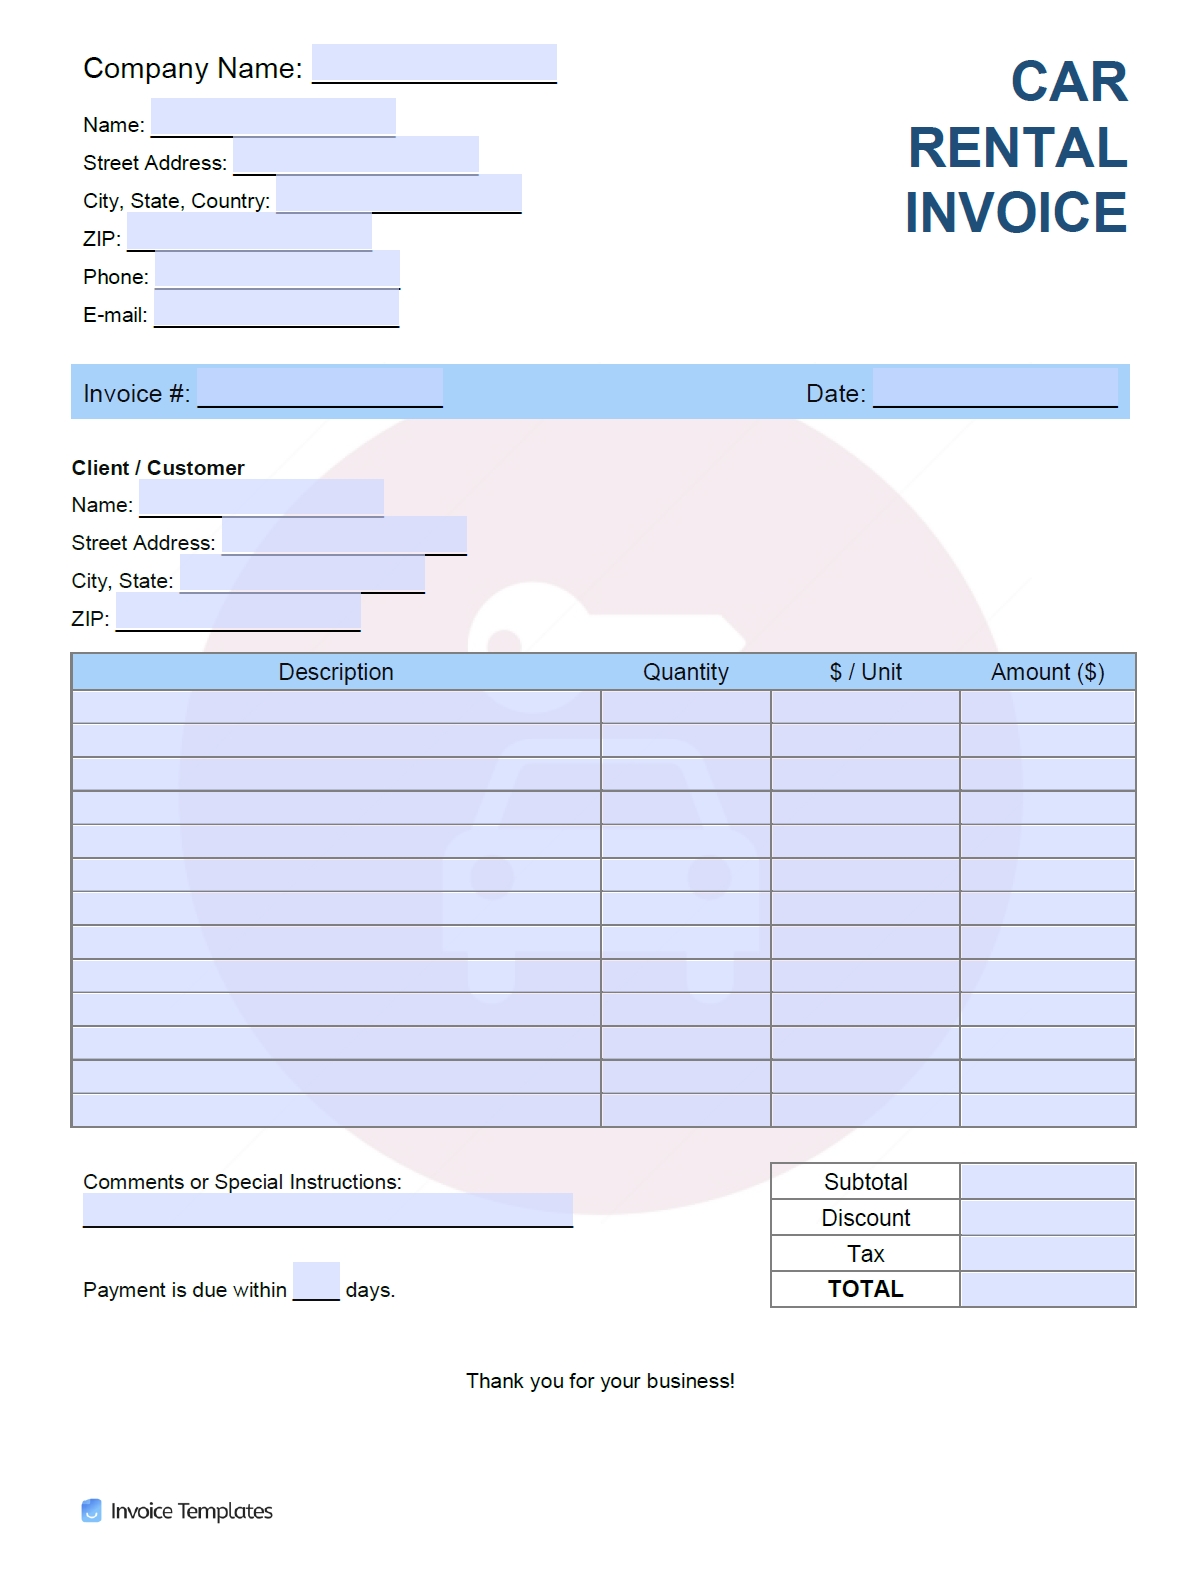 Invoice Template For Car Rental